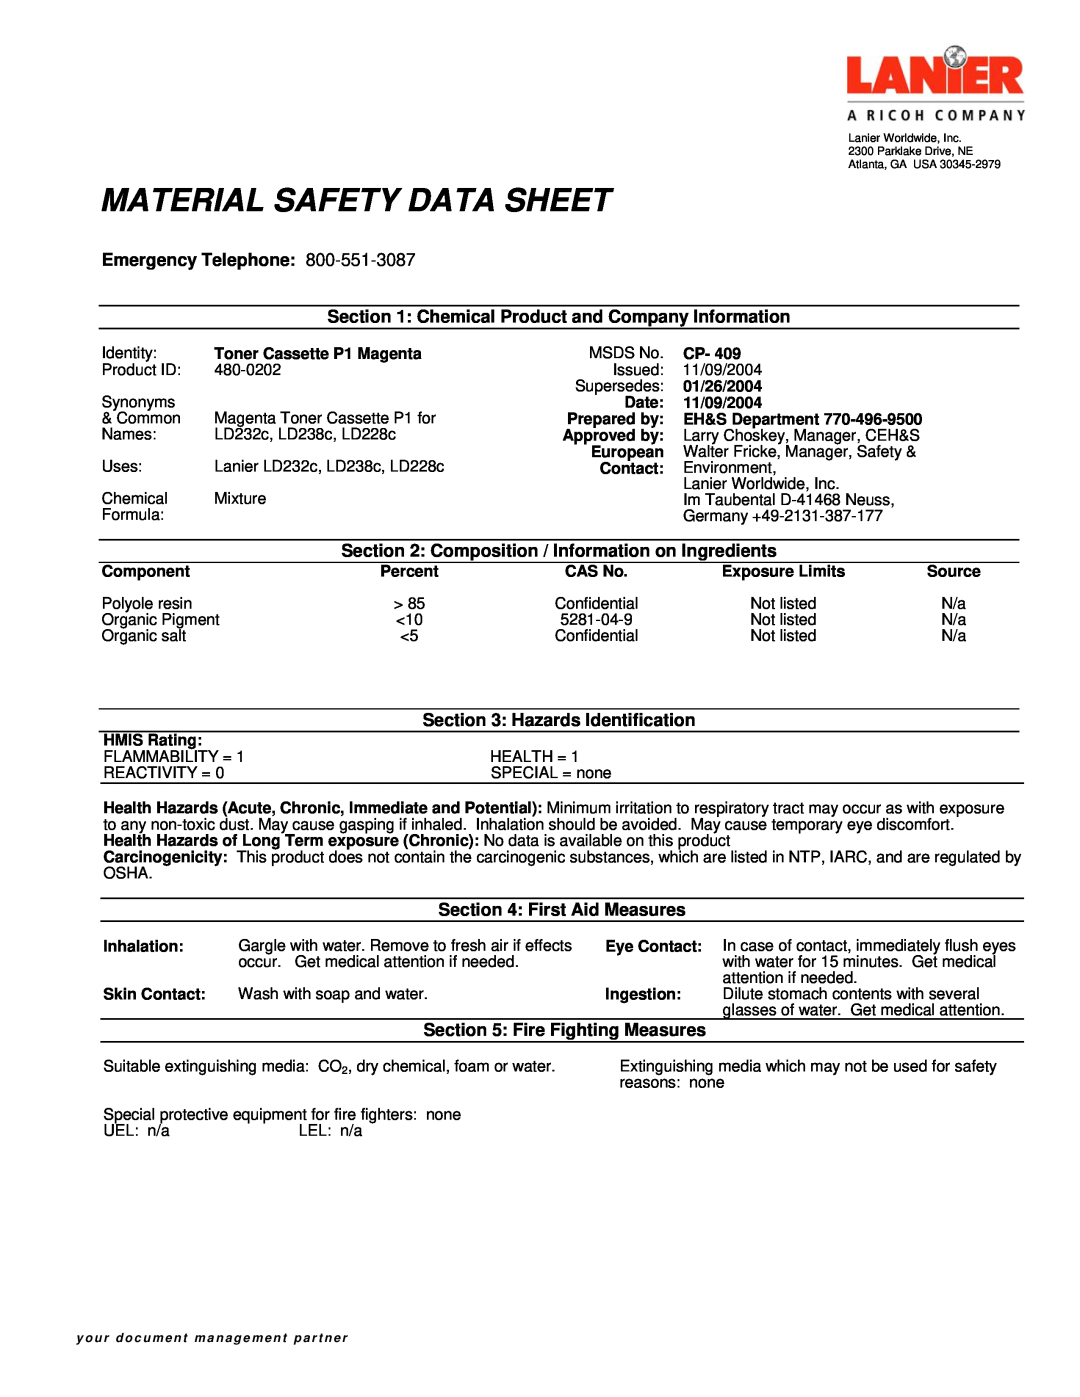 Lanier LD238C, LD228C manual Material Safety Data Sheet, Emergency Telephone, Hazards Identification, First Aid Measures 